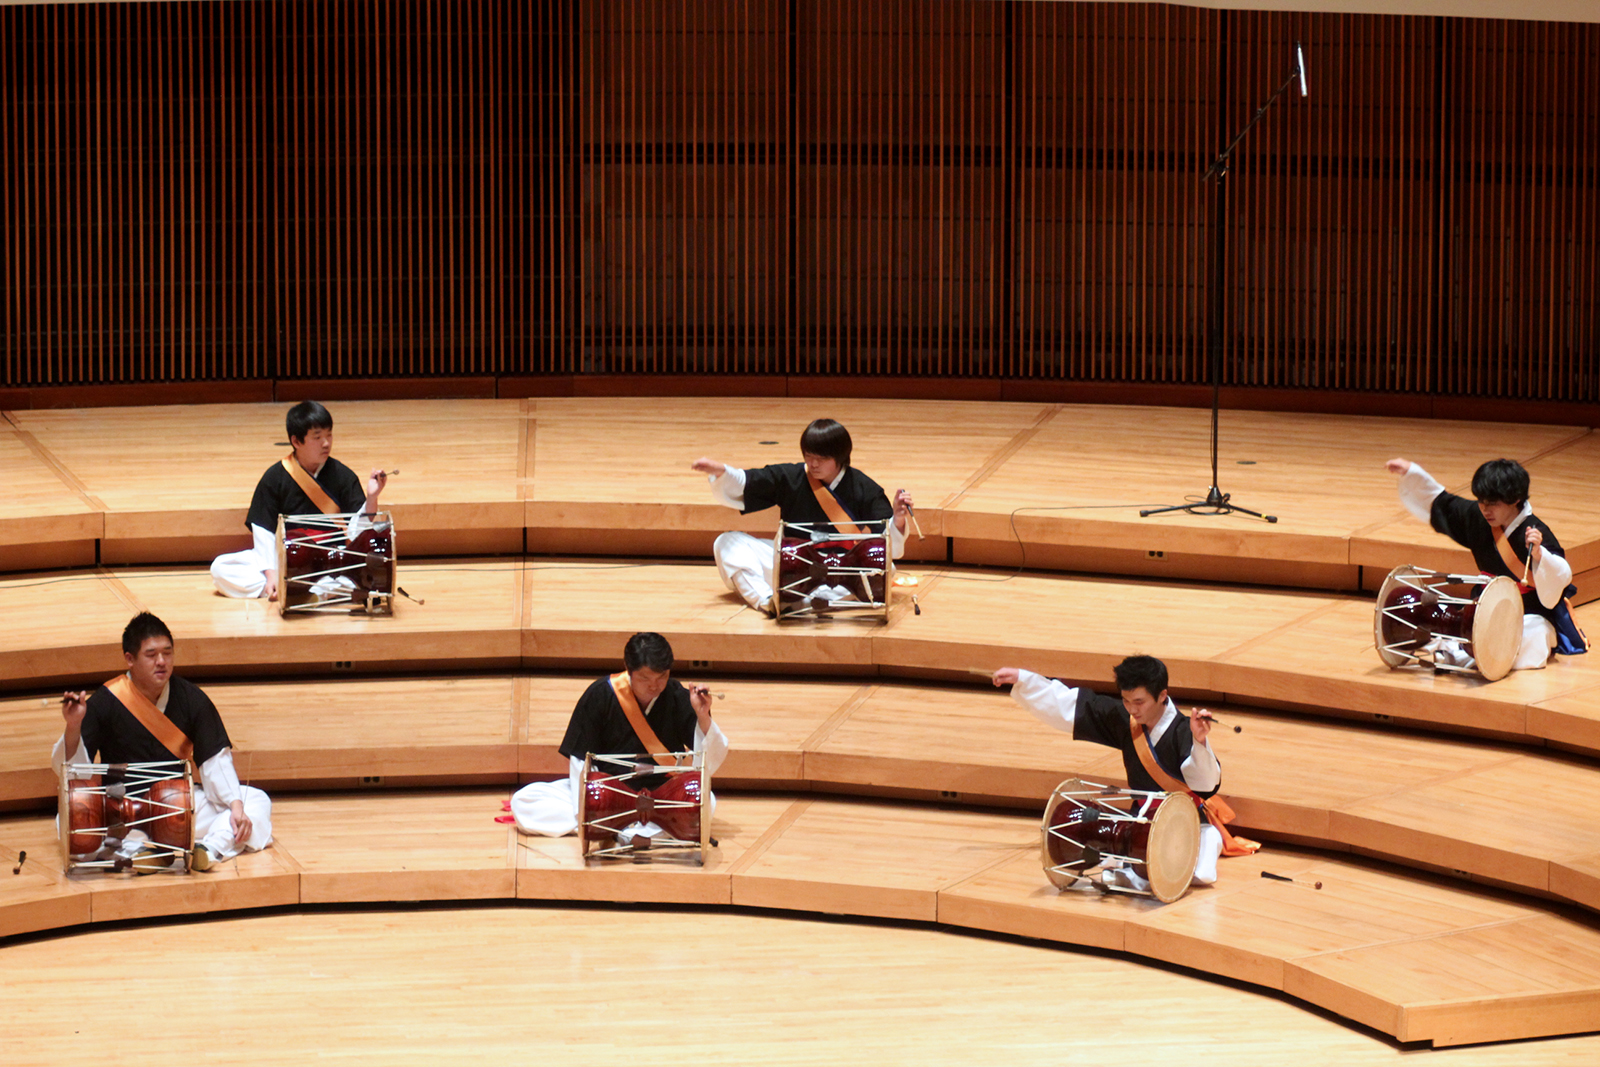 Members of the UMD Korean Percussion Ensemble play hourglass drums on stage.